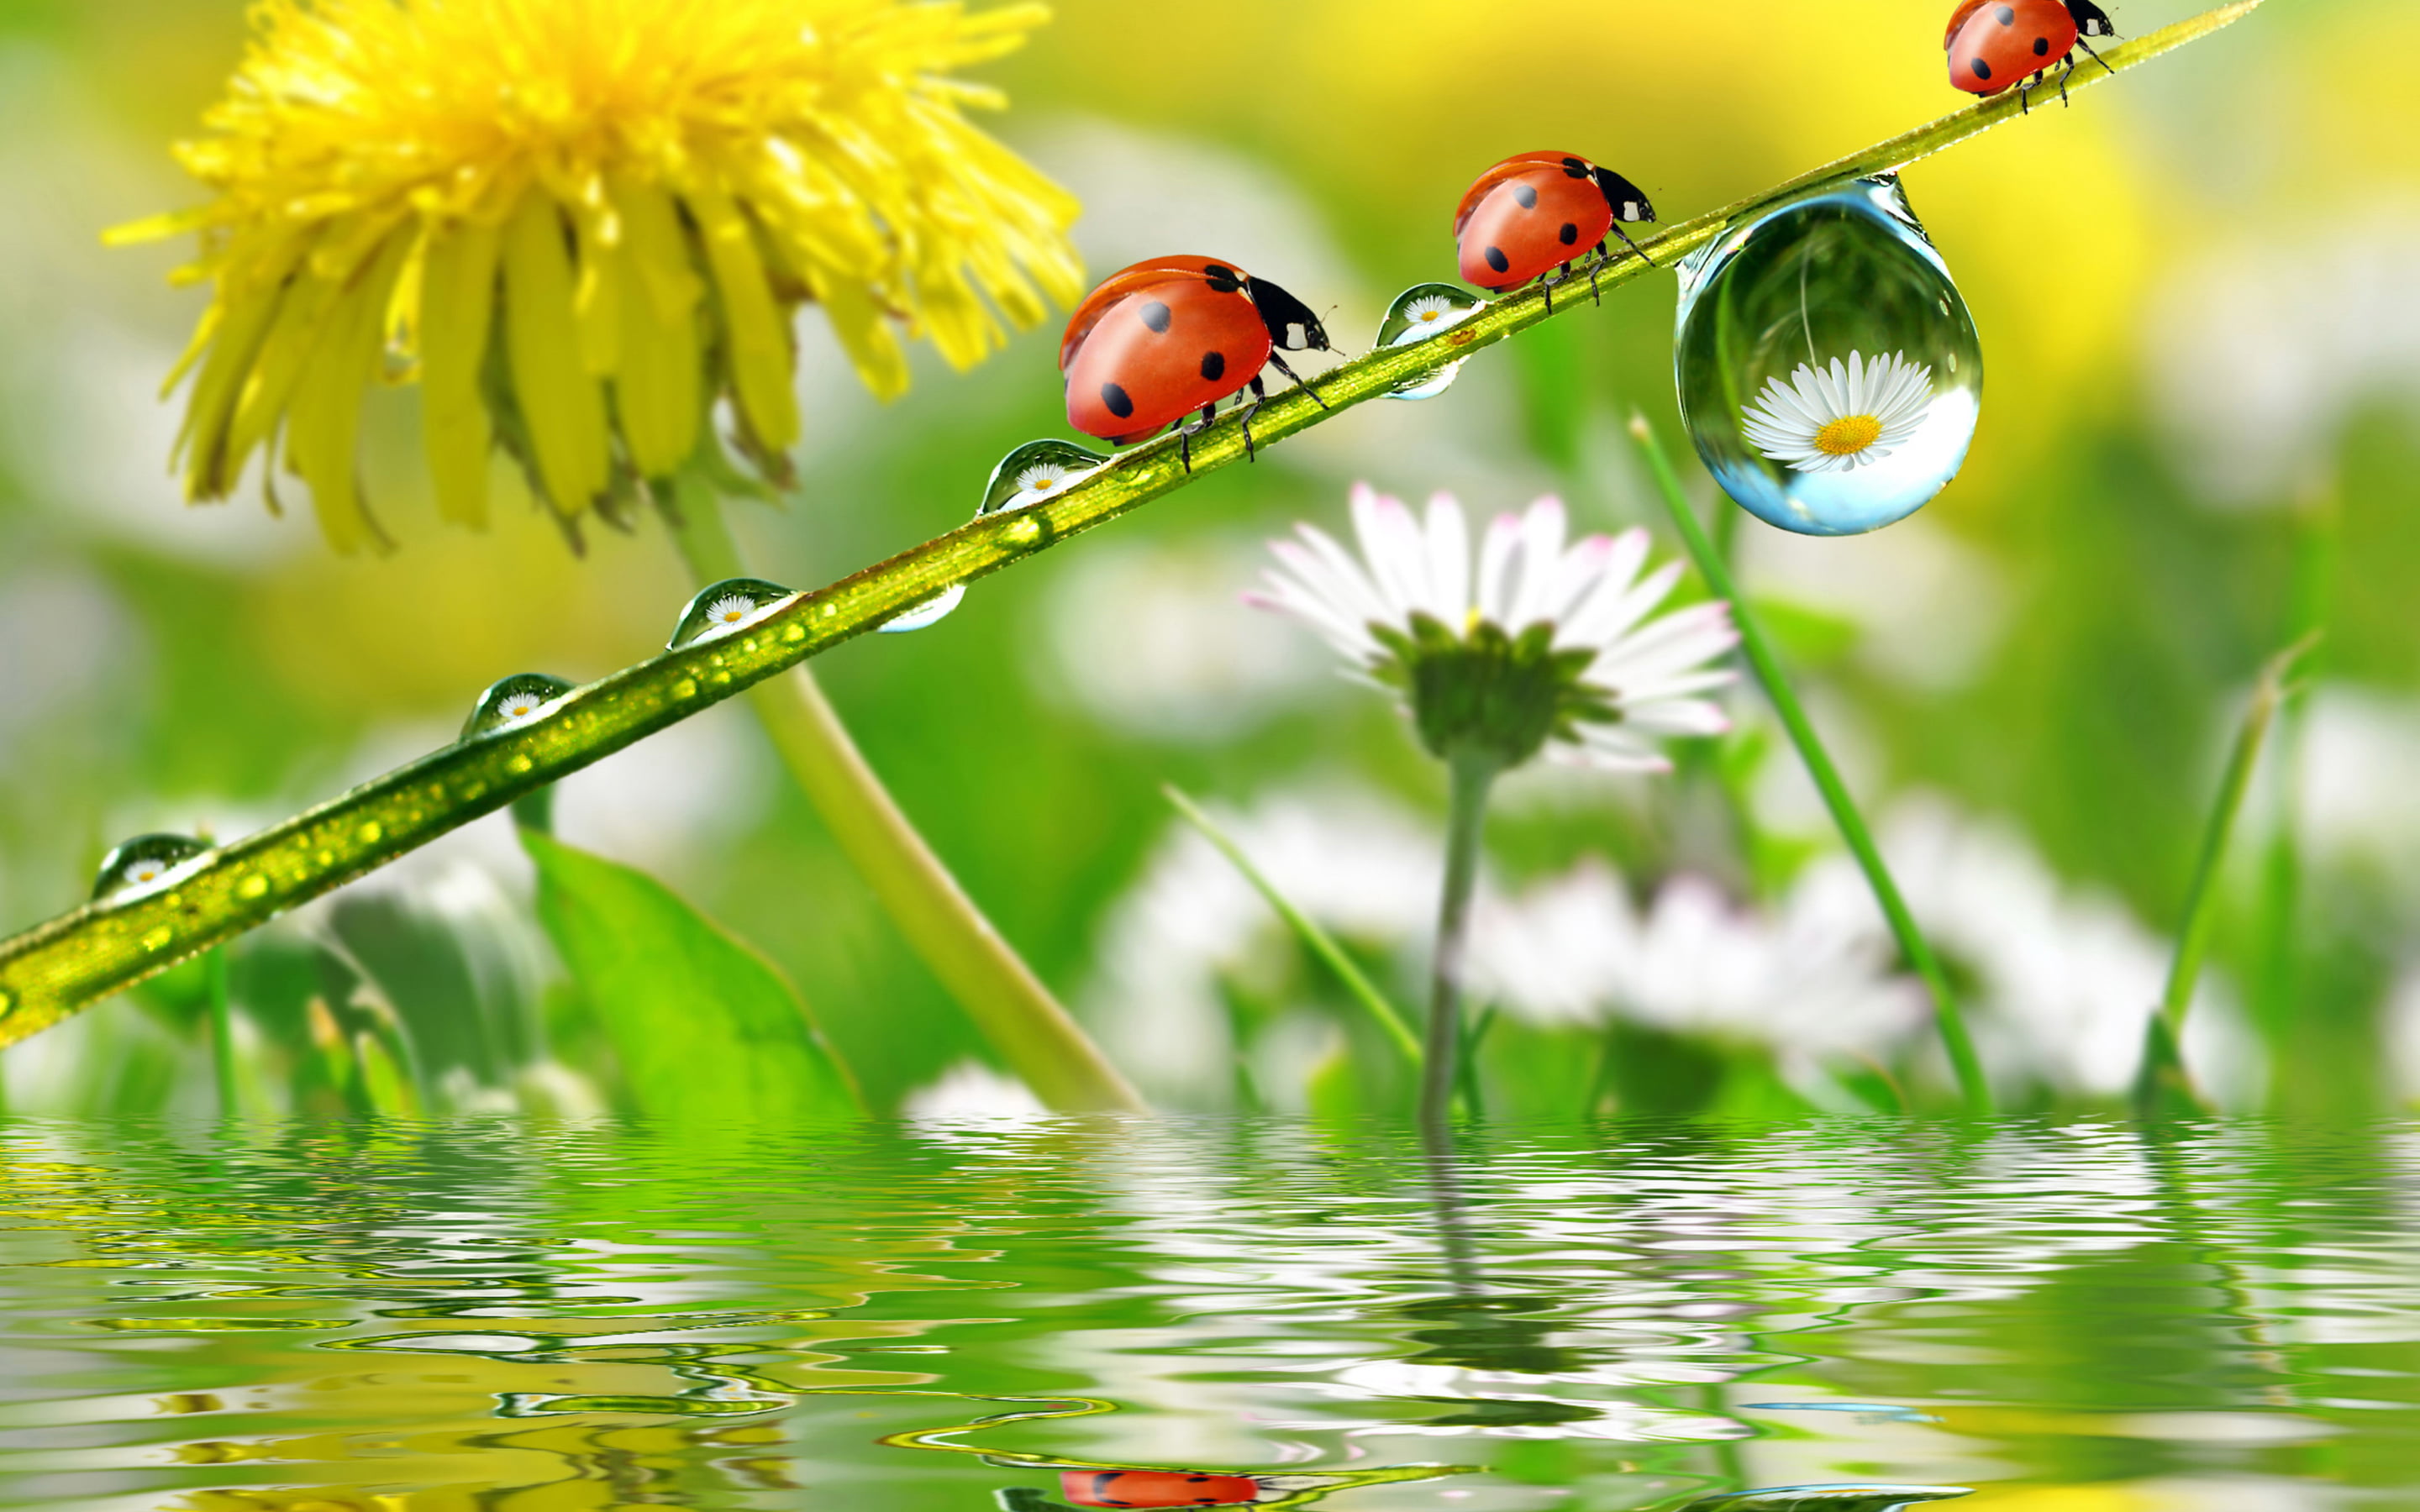 Nature Dandelion Chamomile Insect Ladybug Spring Rain Drops Water Desktop Hd Wallpapers For Mobile Phones And Computer 2880×1800